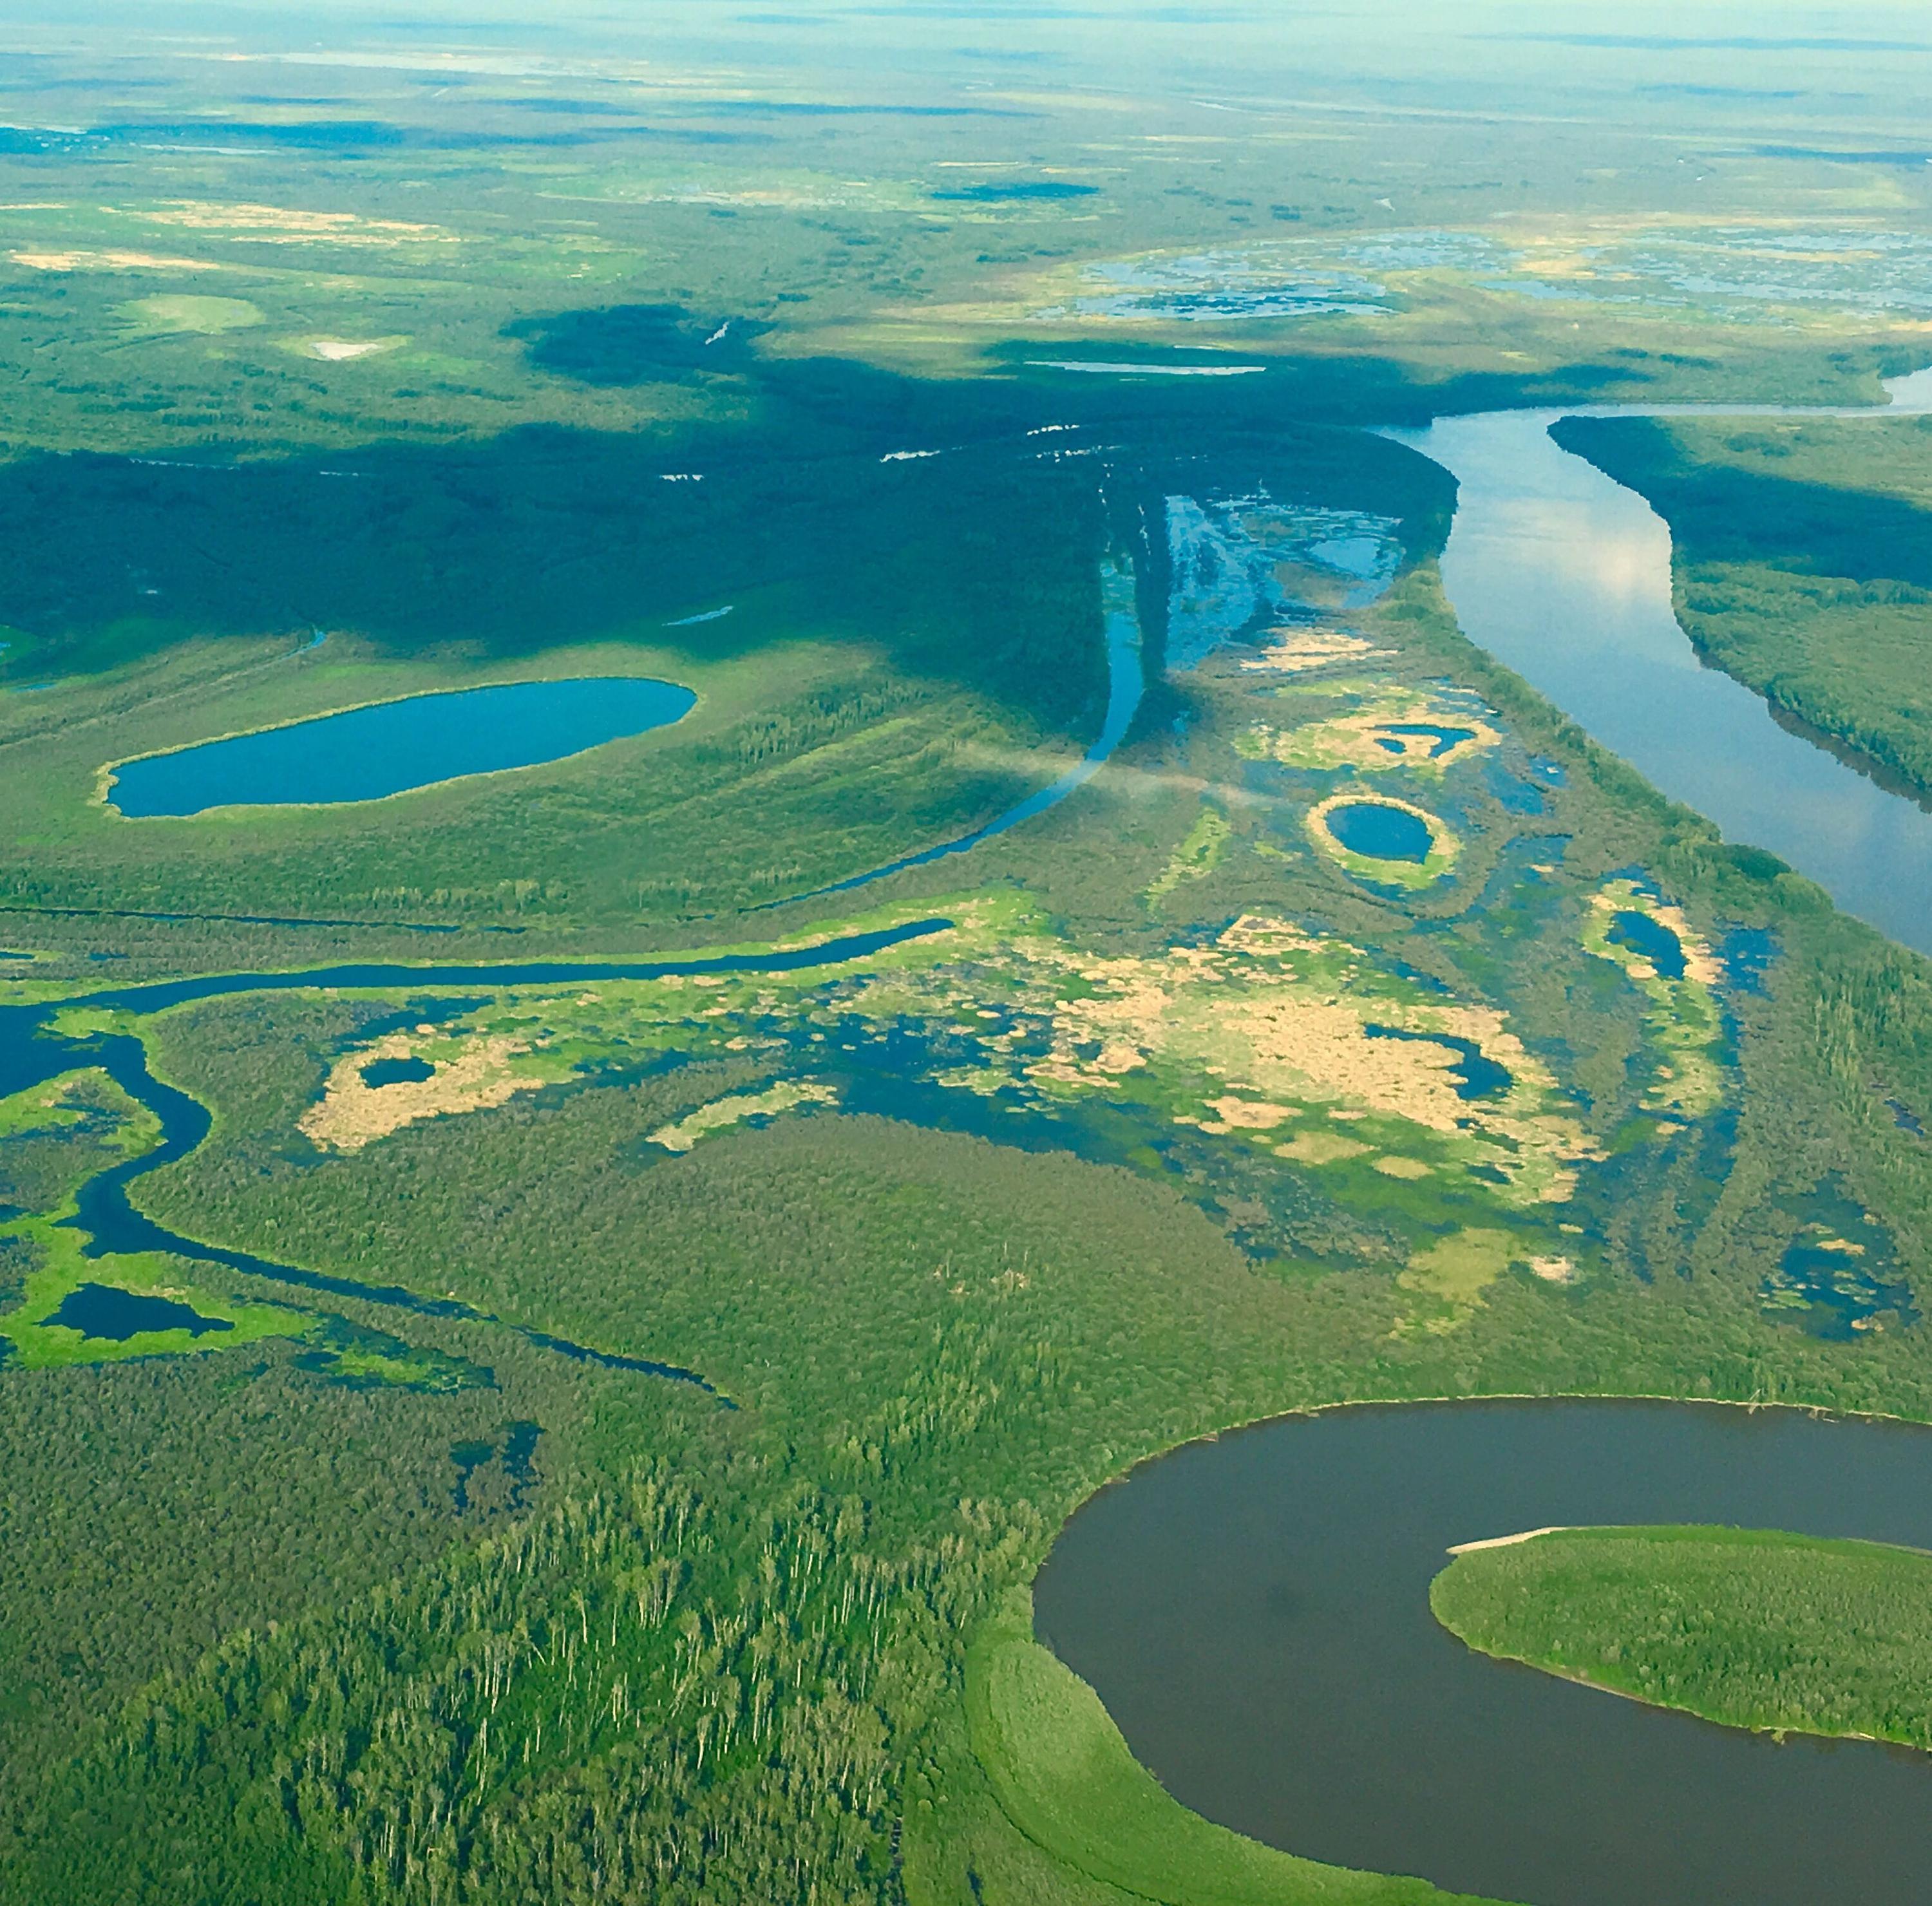 Peace-Athabasca Delta aerial view: a river winding through green marshy areas